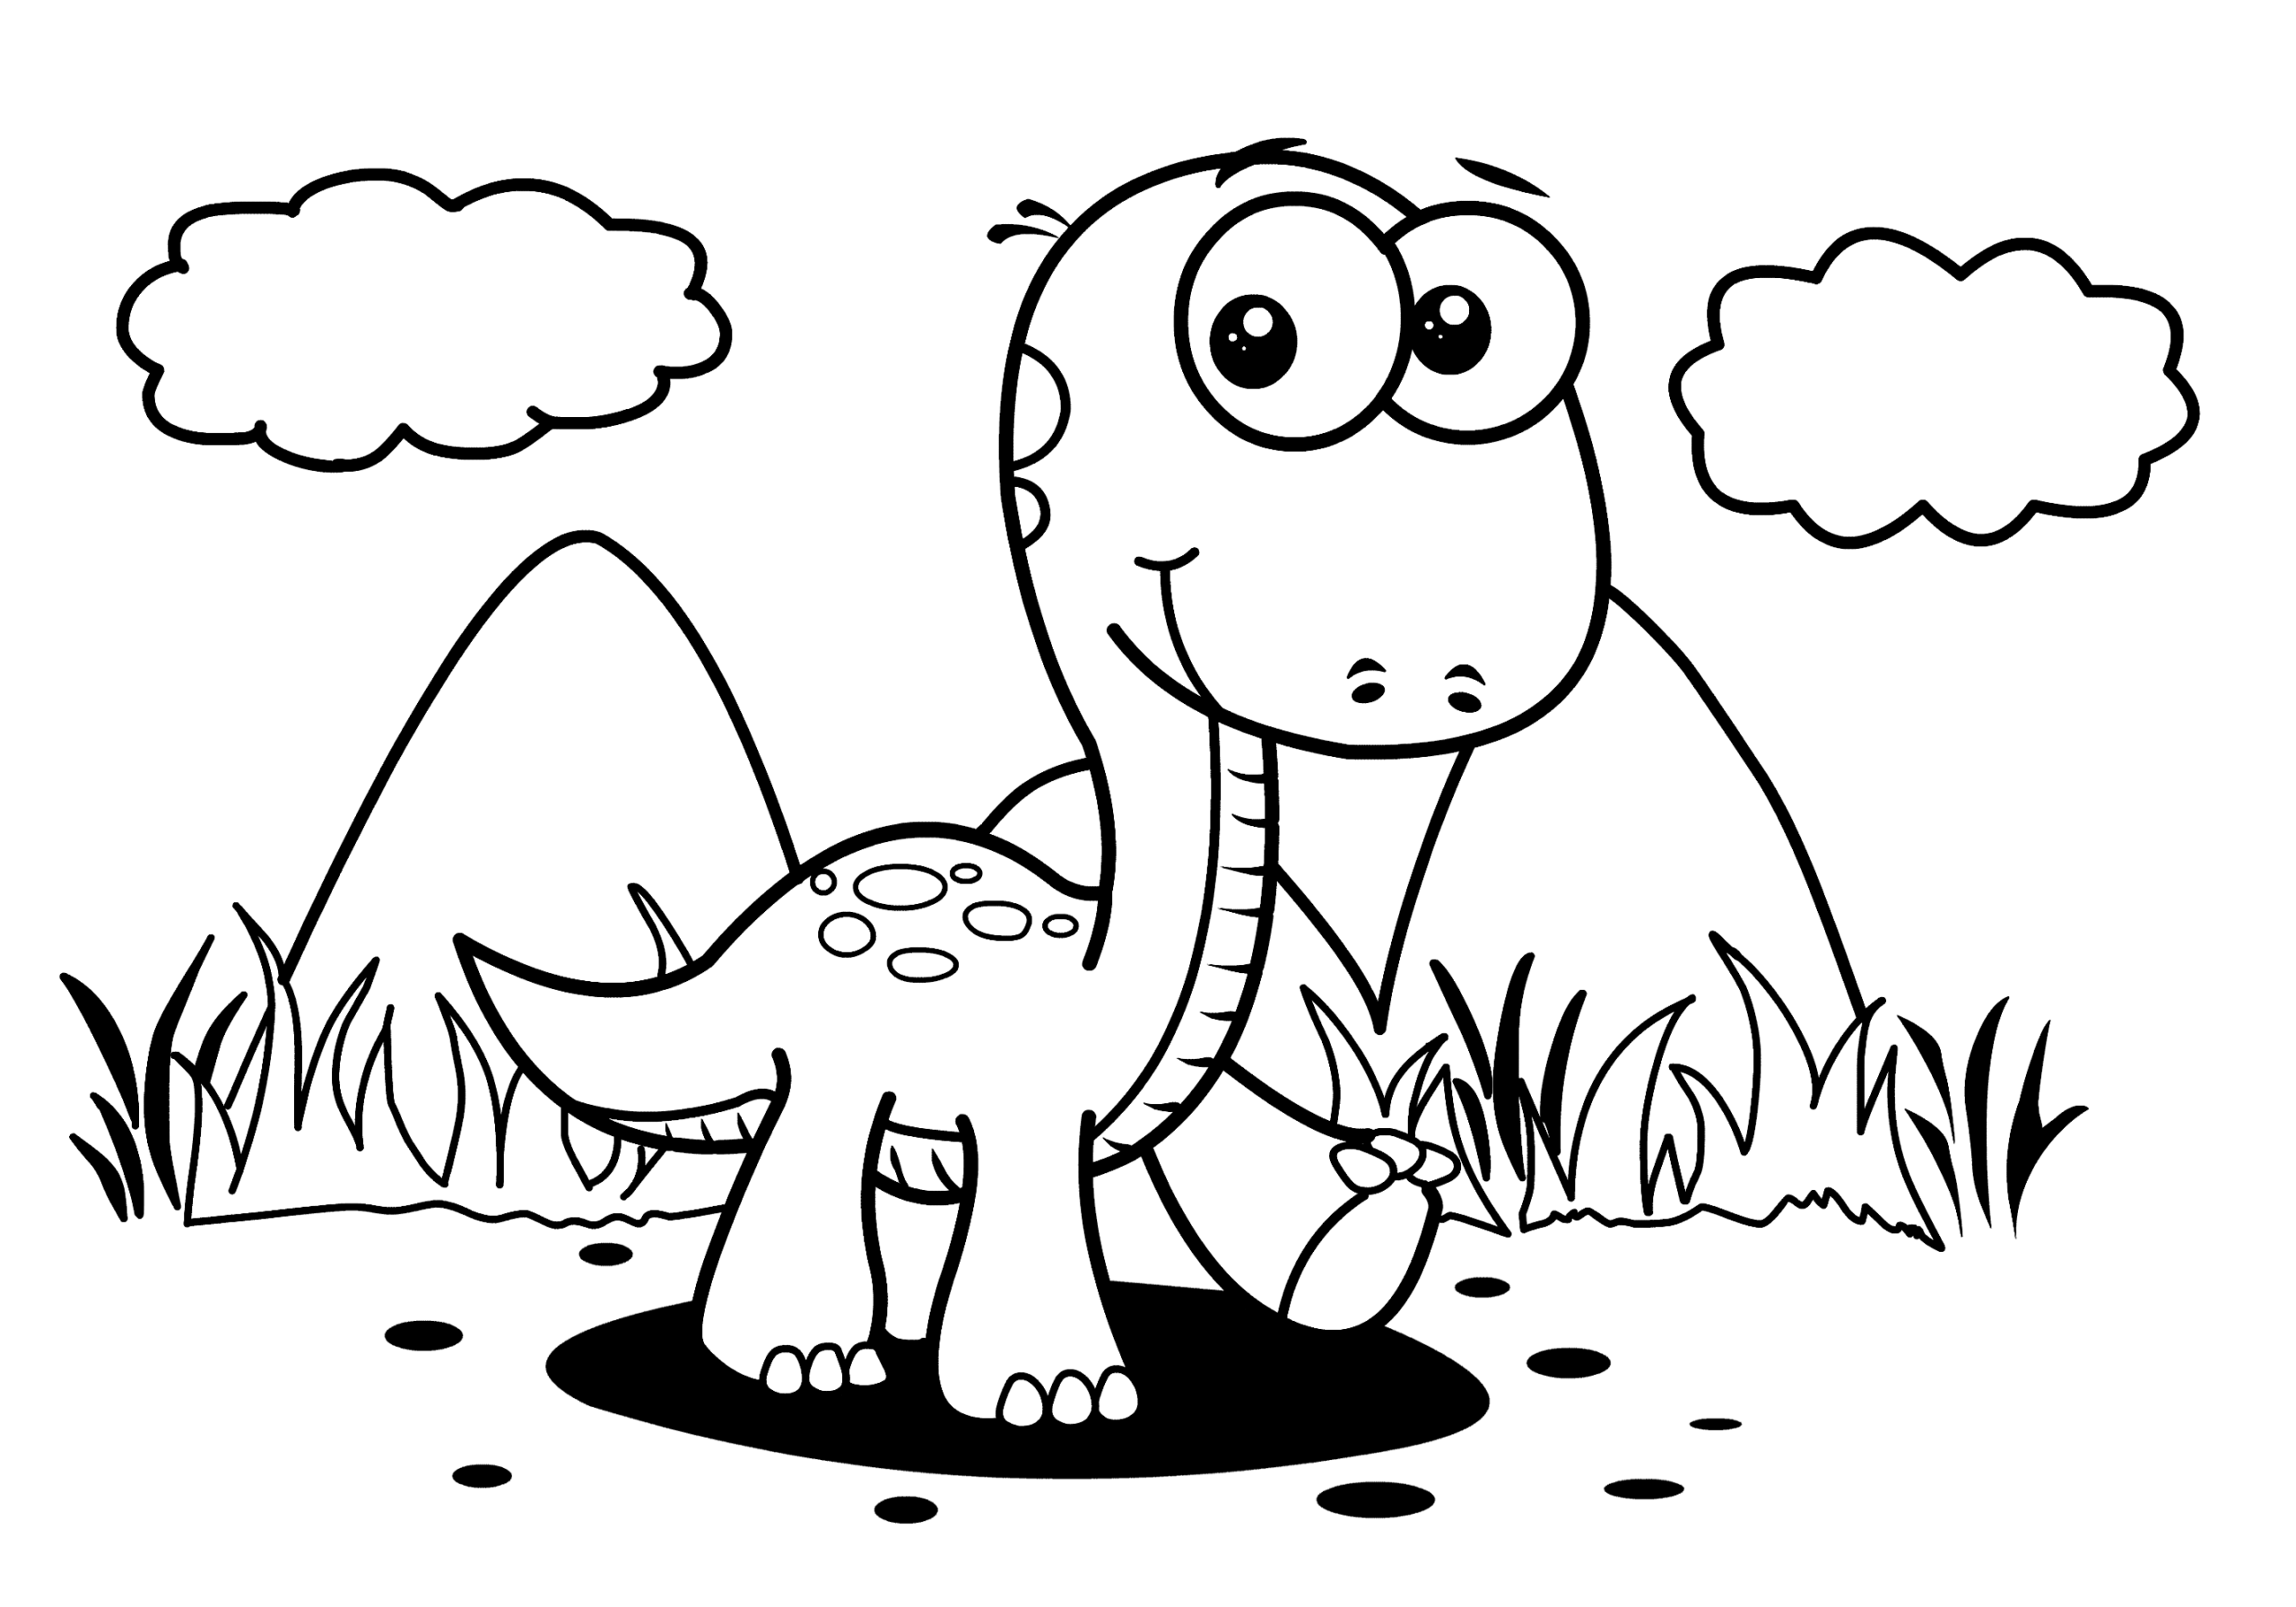 Printable Easy and Cute Dinosaur Coloring Pages